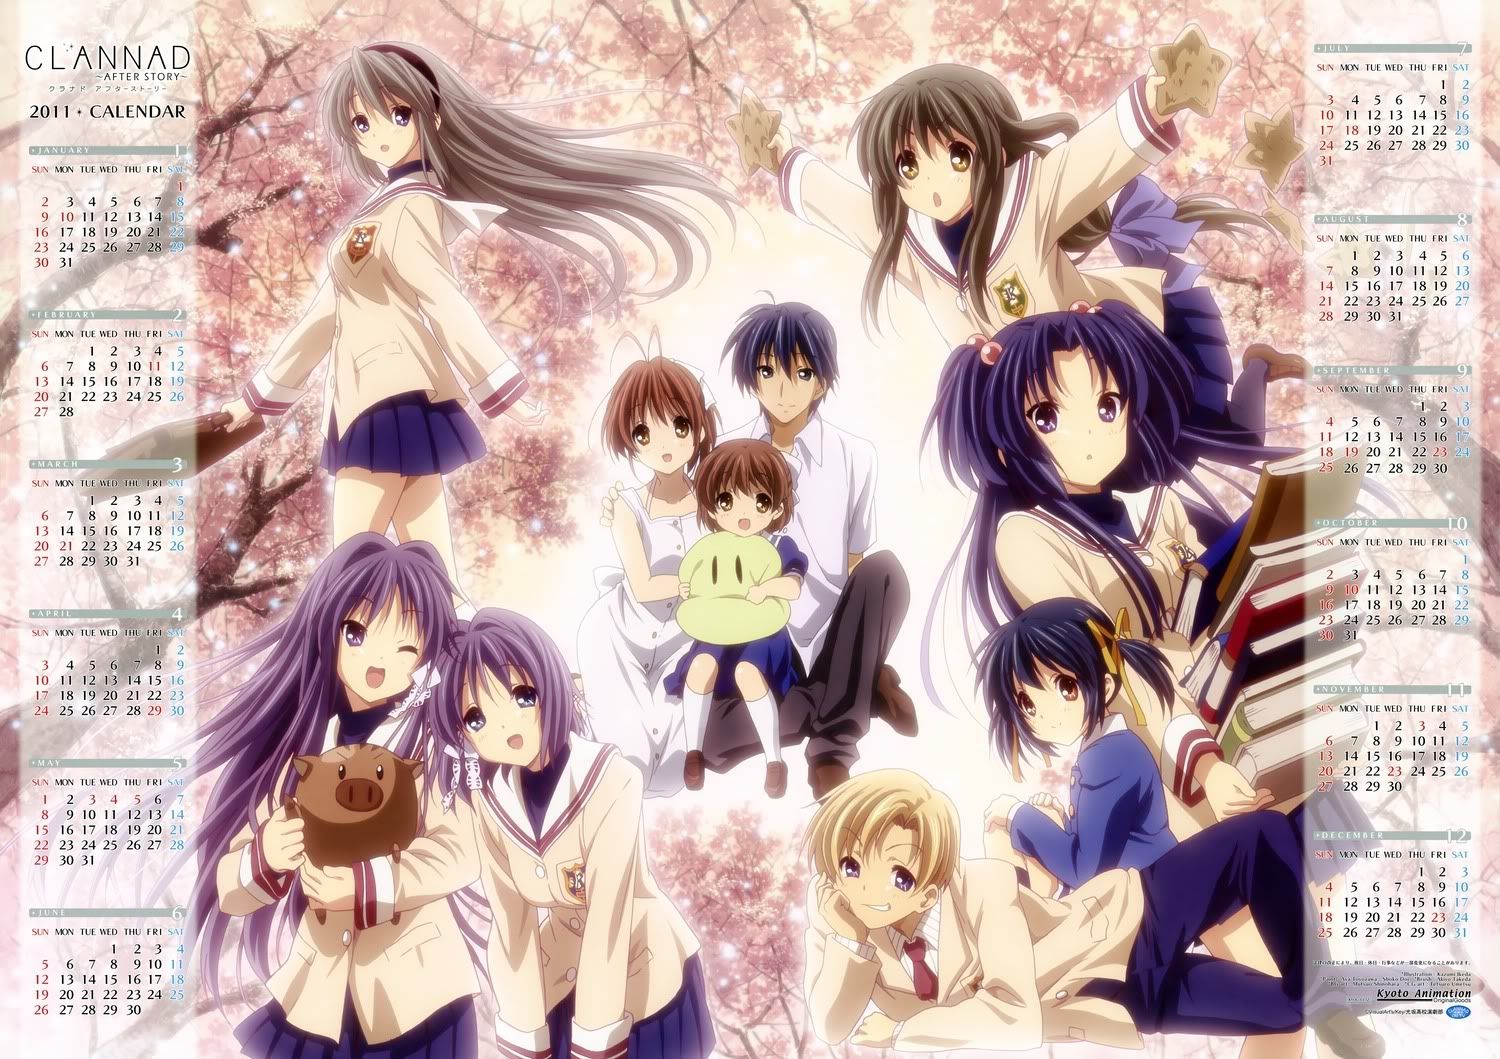 clannad after story blu-ray box